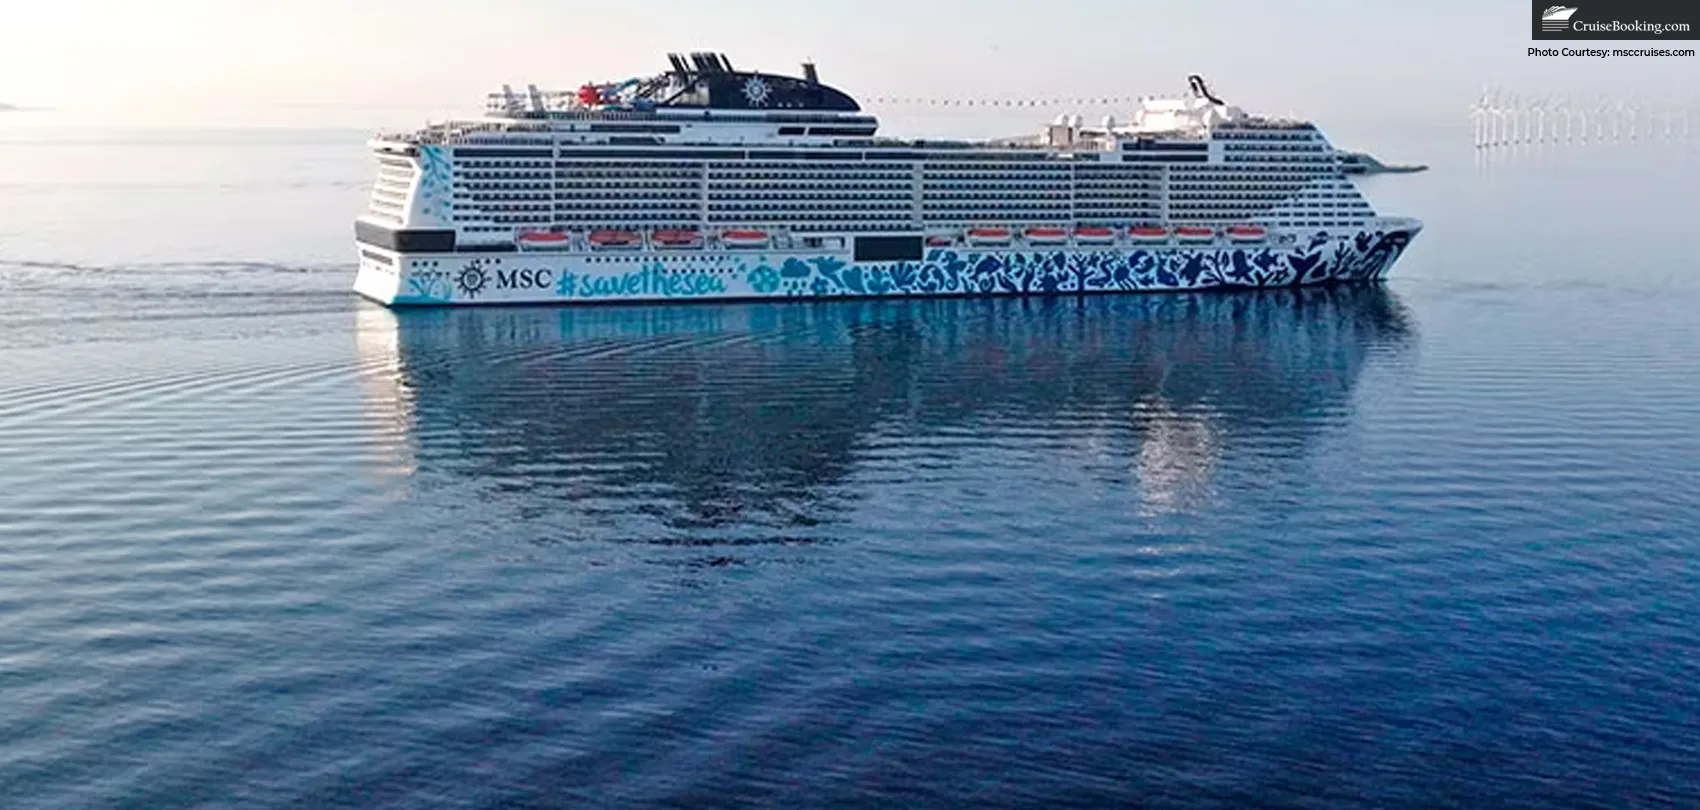 MSC Euribia Makes Maiden Call in Cadiz, gets Bunkered with LNG